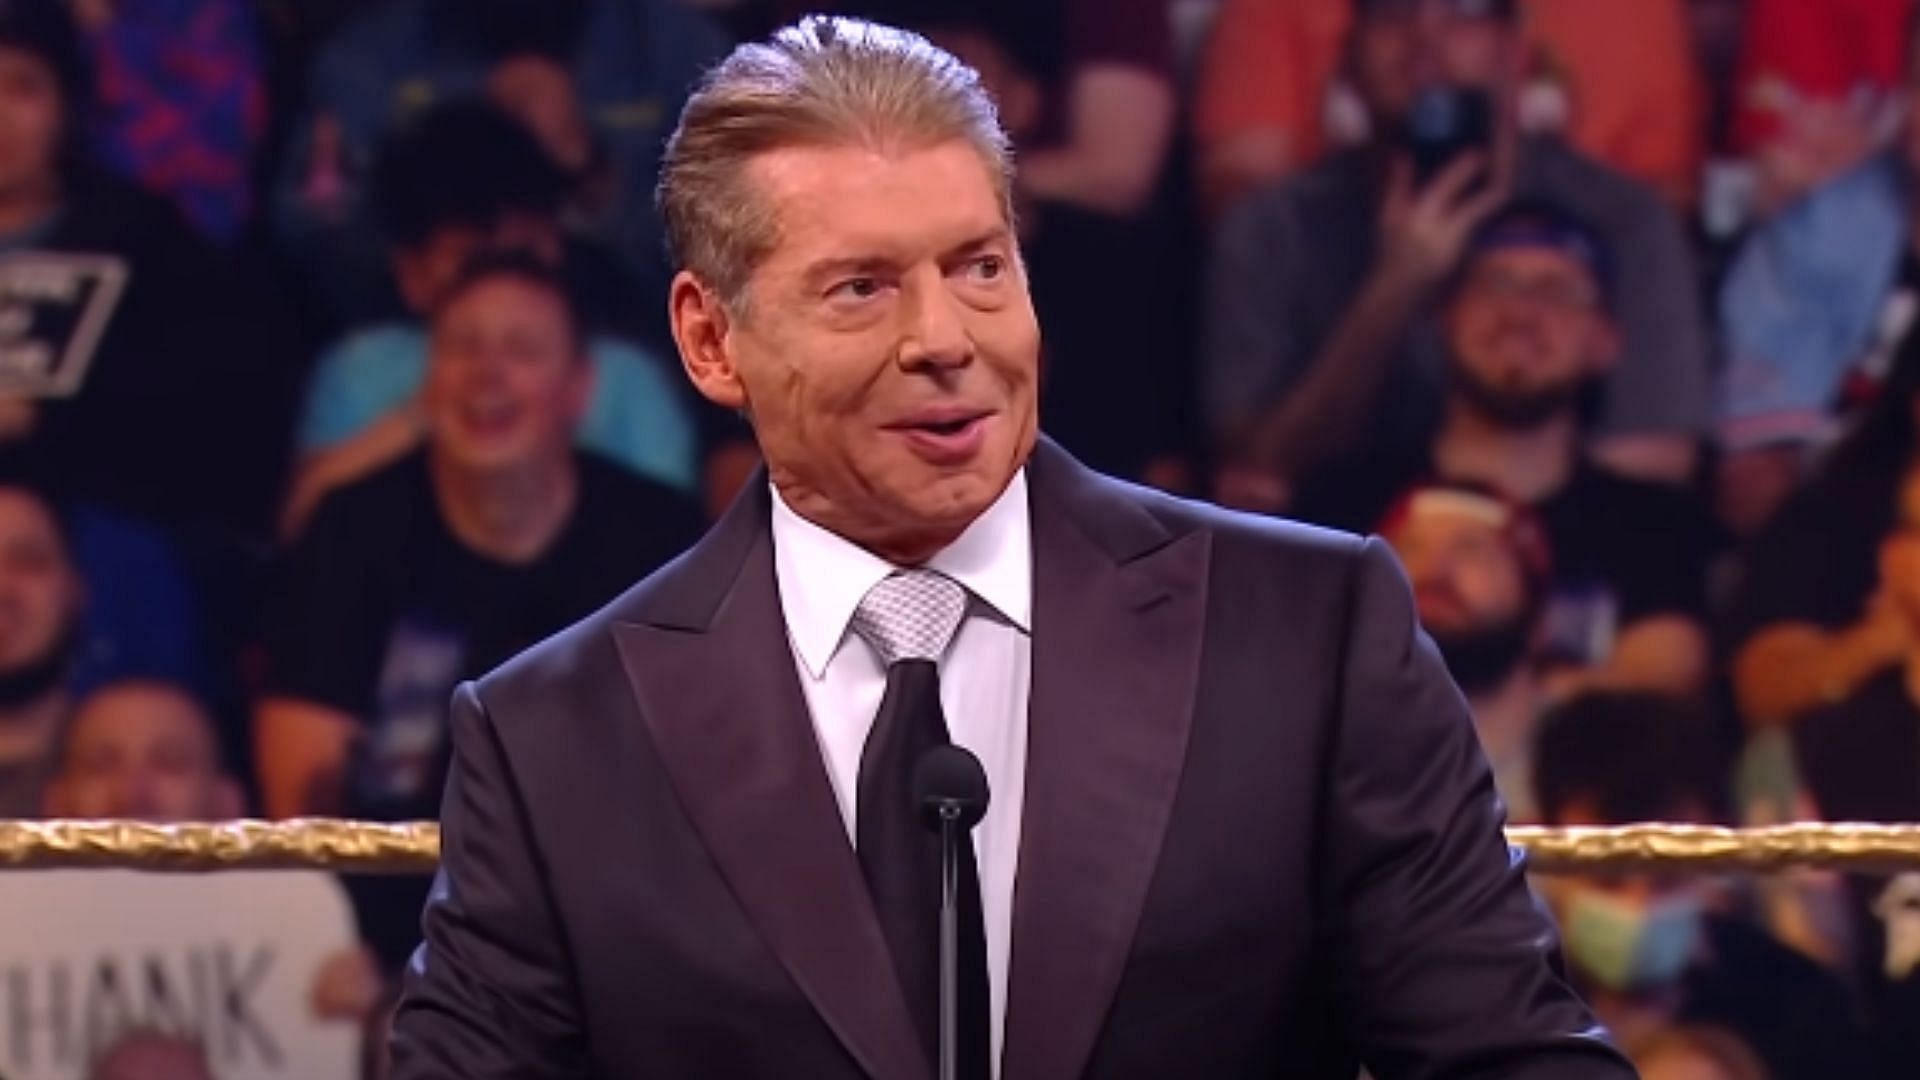 Vince McMahon took charge of WWE in 1982